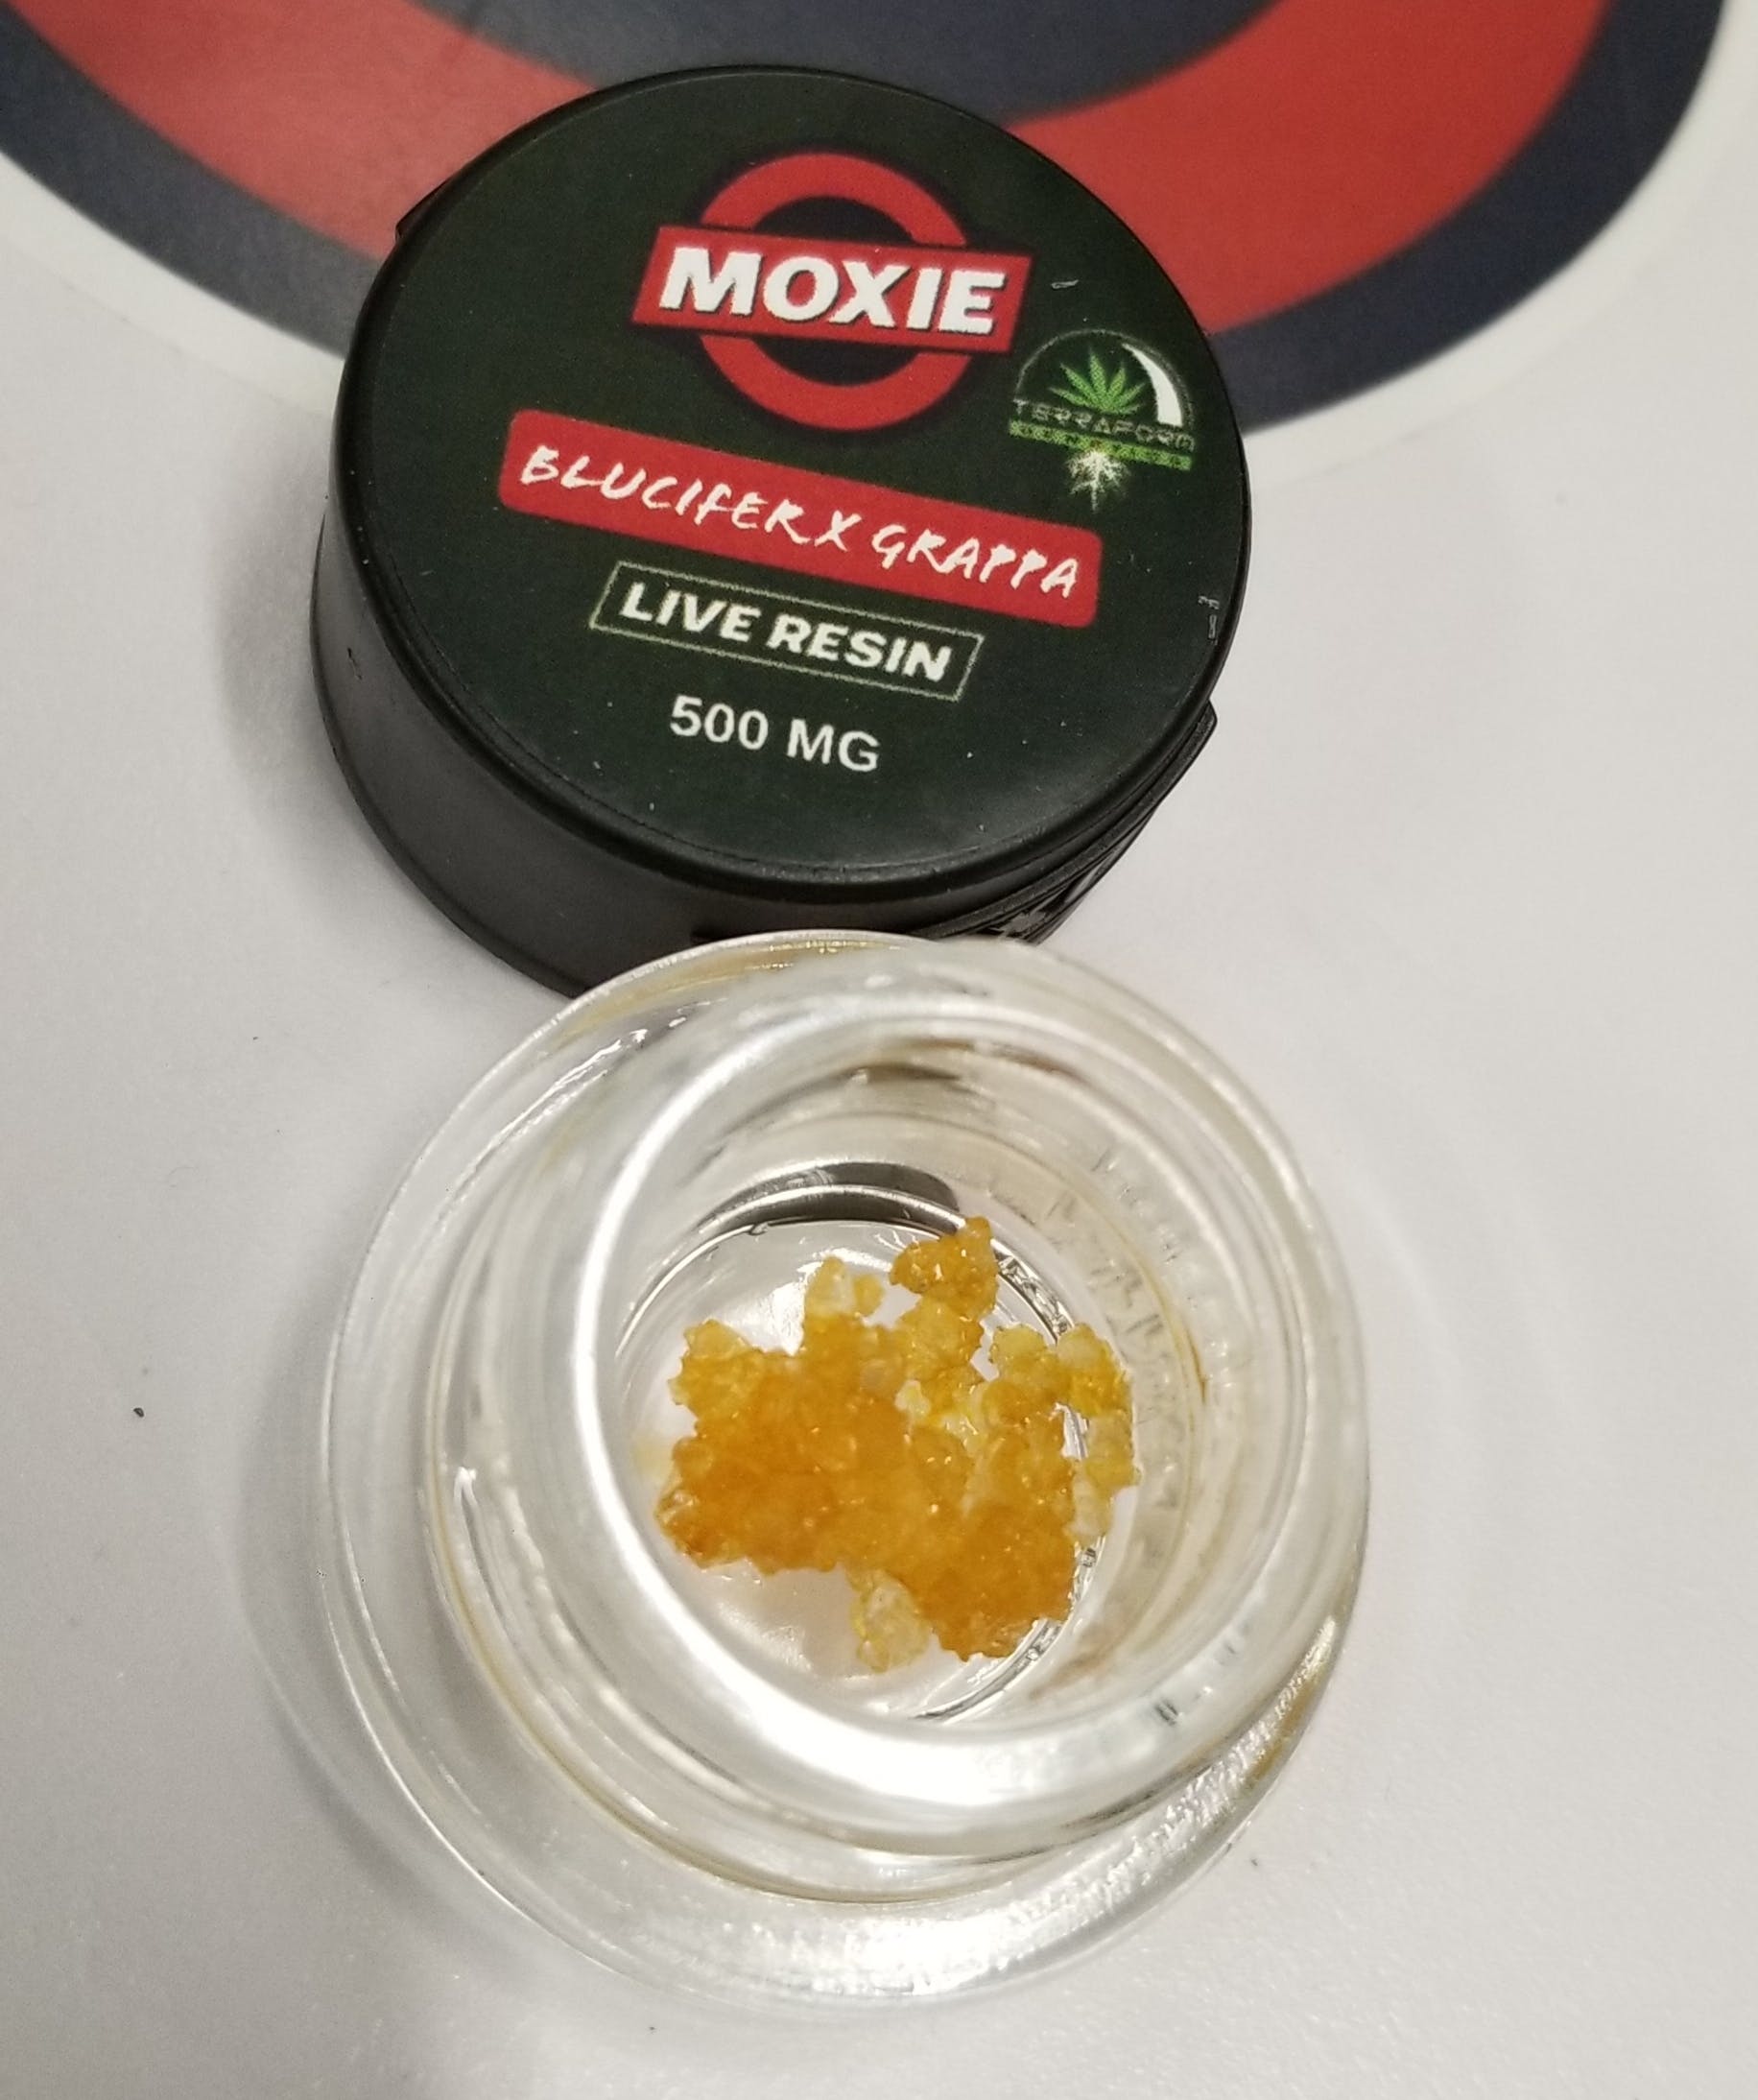 marijuana-dispensaries-the-pottery-recreational-in-los-angeles-blucifer-x-grappa-live-resin-thc-a